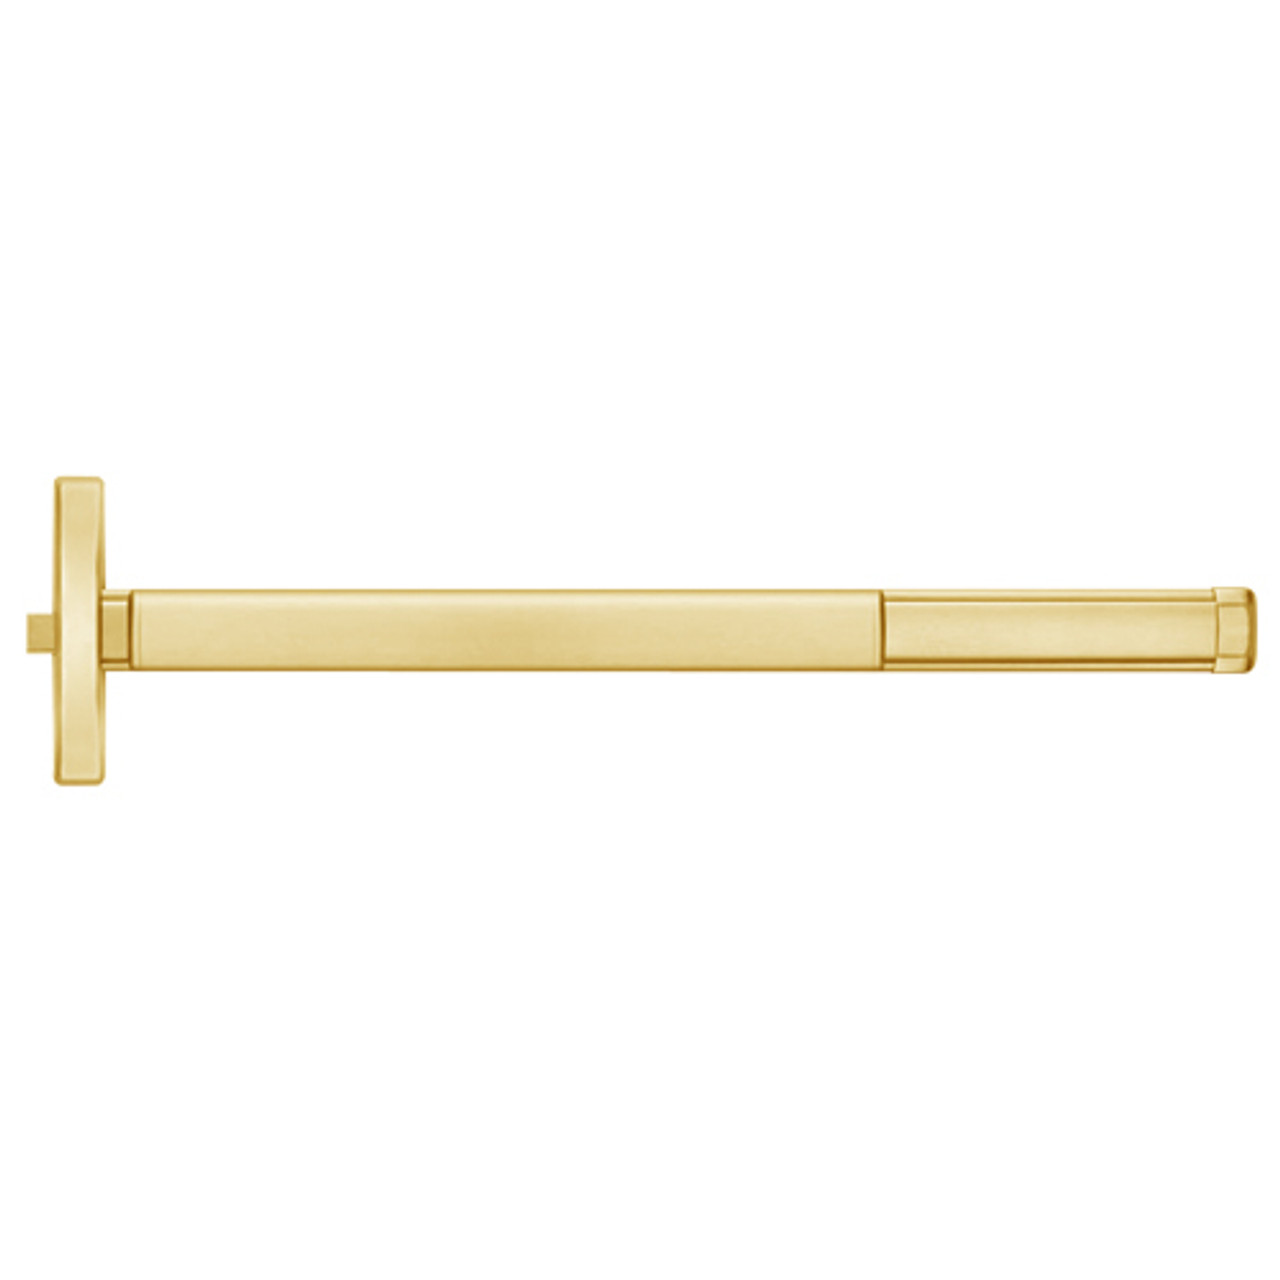 MLR2403-605-48 PHI 2400 Series Non Fire Rated Apex Rim Exit Device with Motorized Latch Retraction Prepped for Key Retracts Latchbolt in Bright Brass Finish